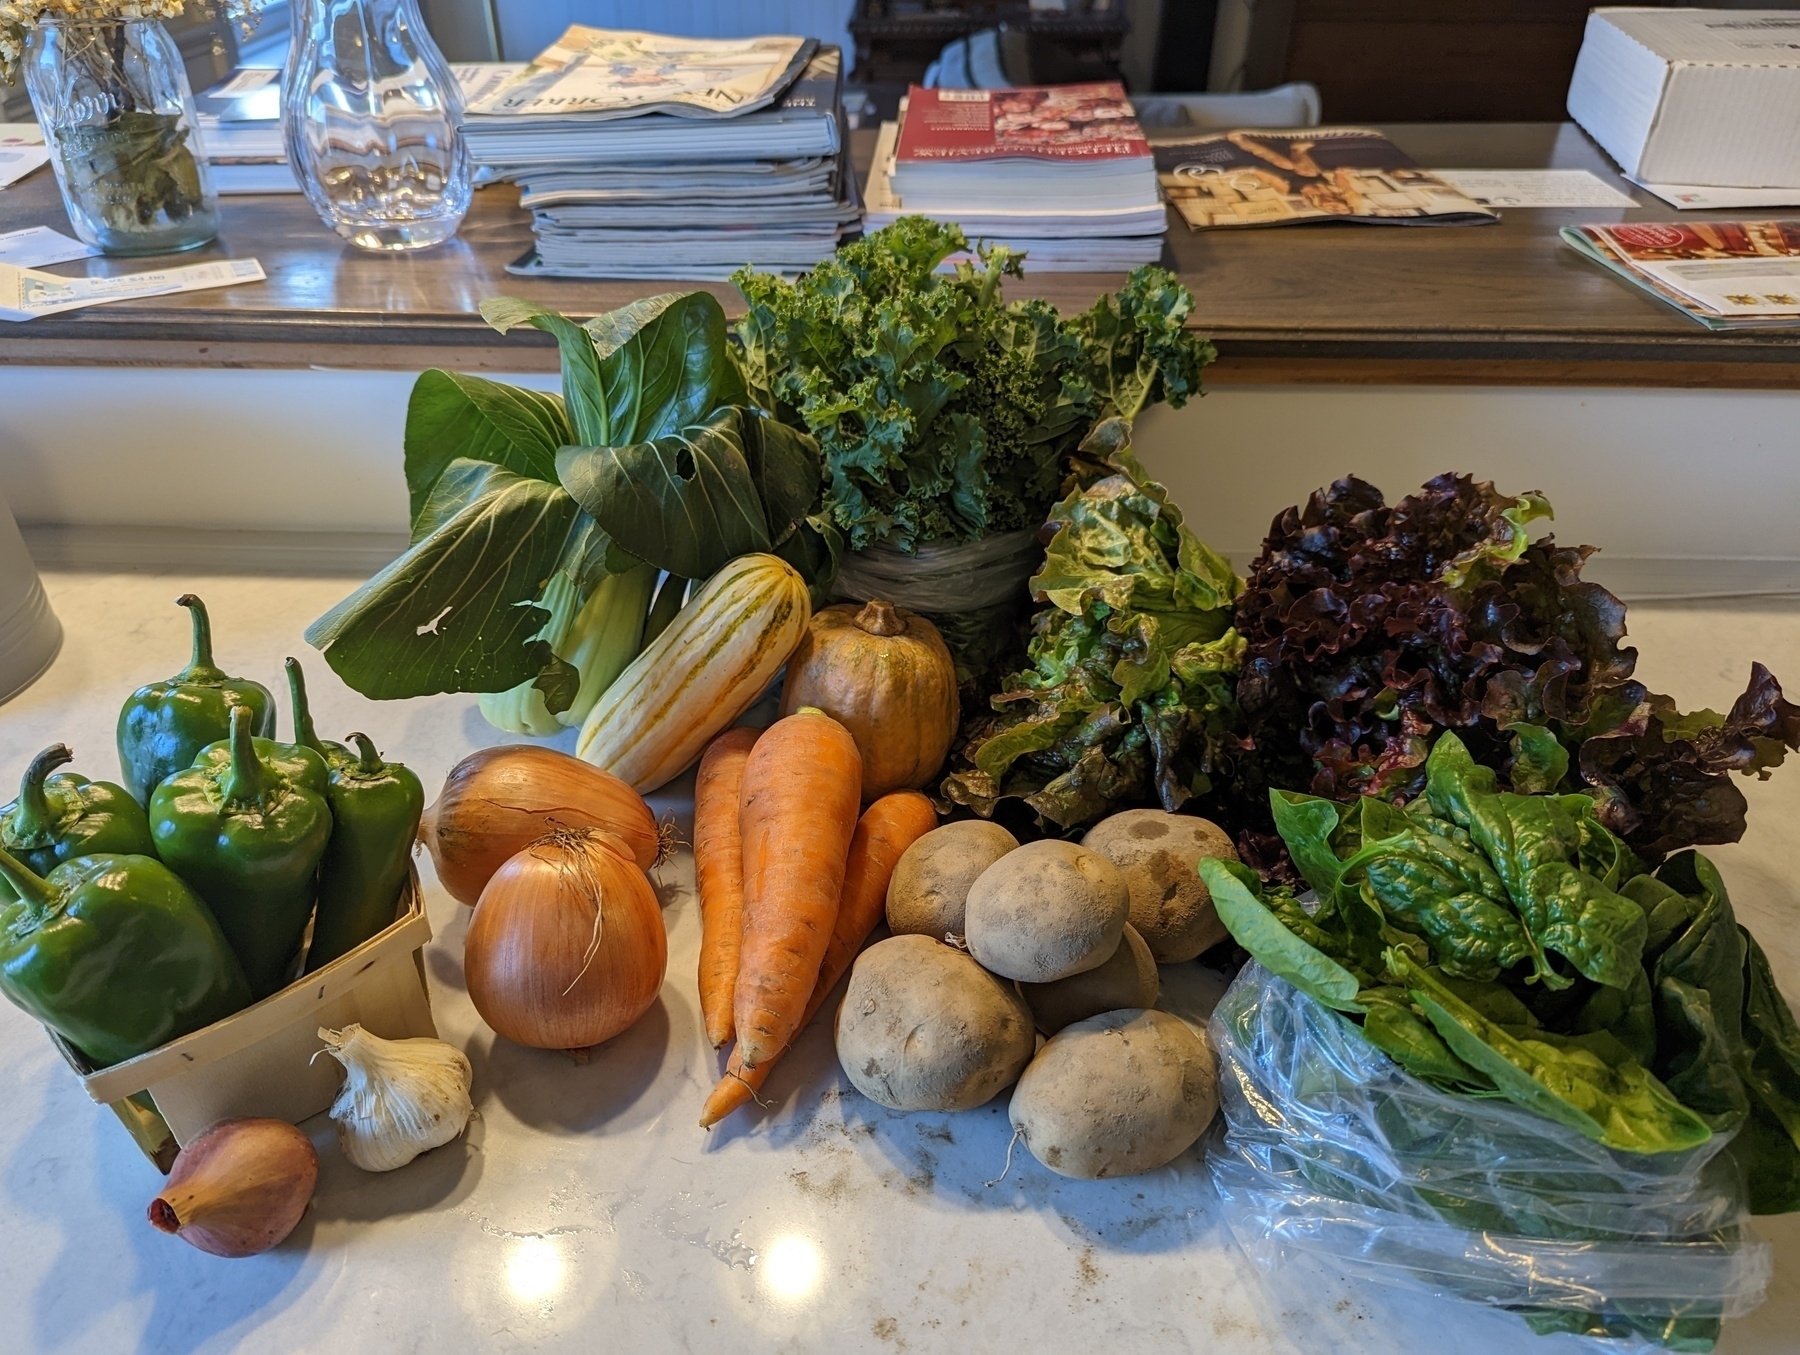 A spread of fresh vegetables